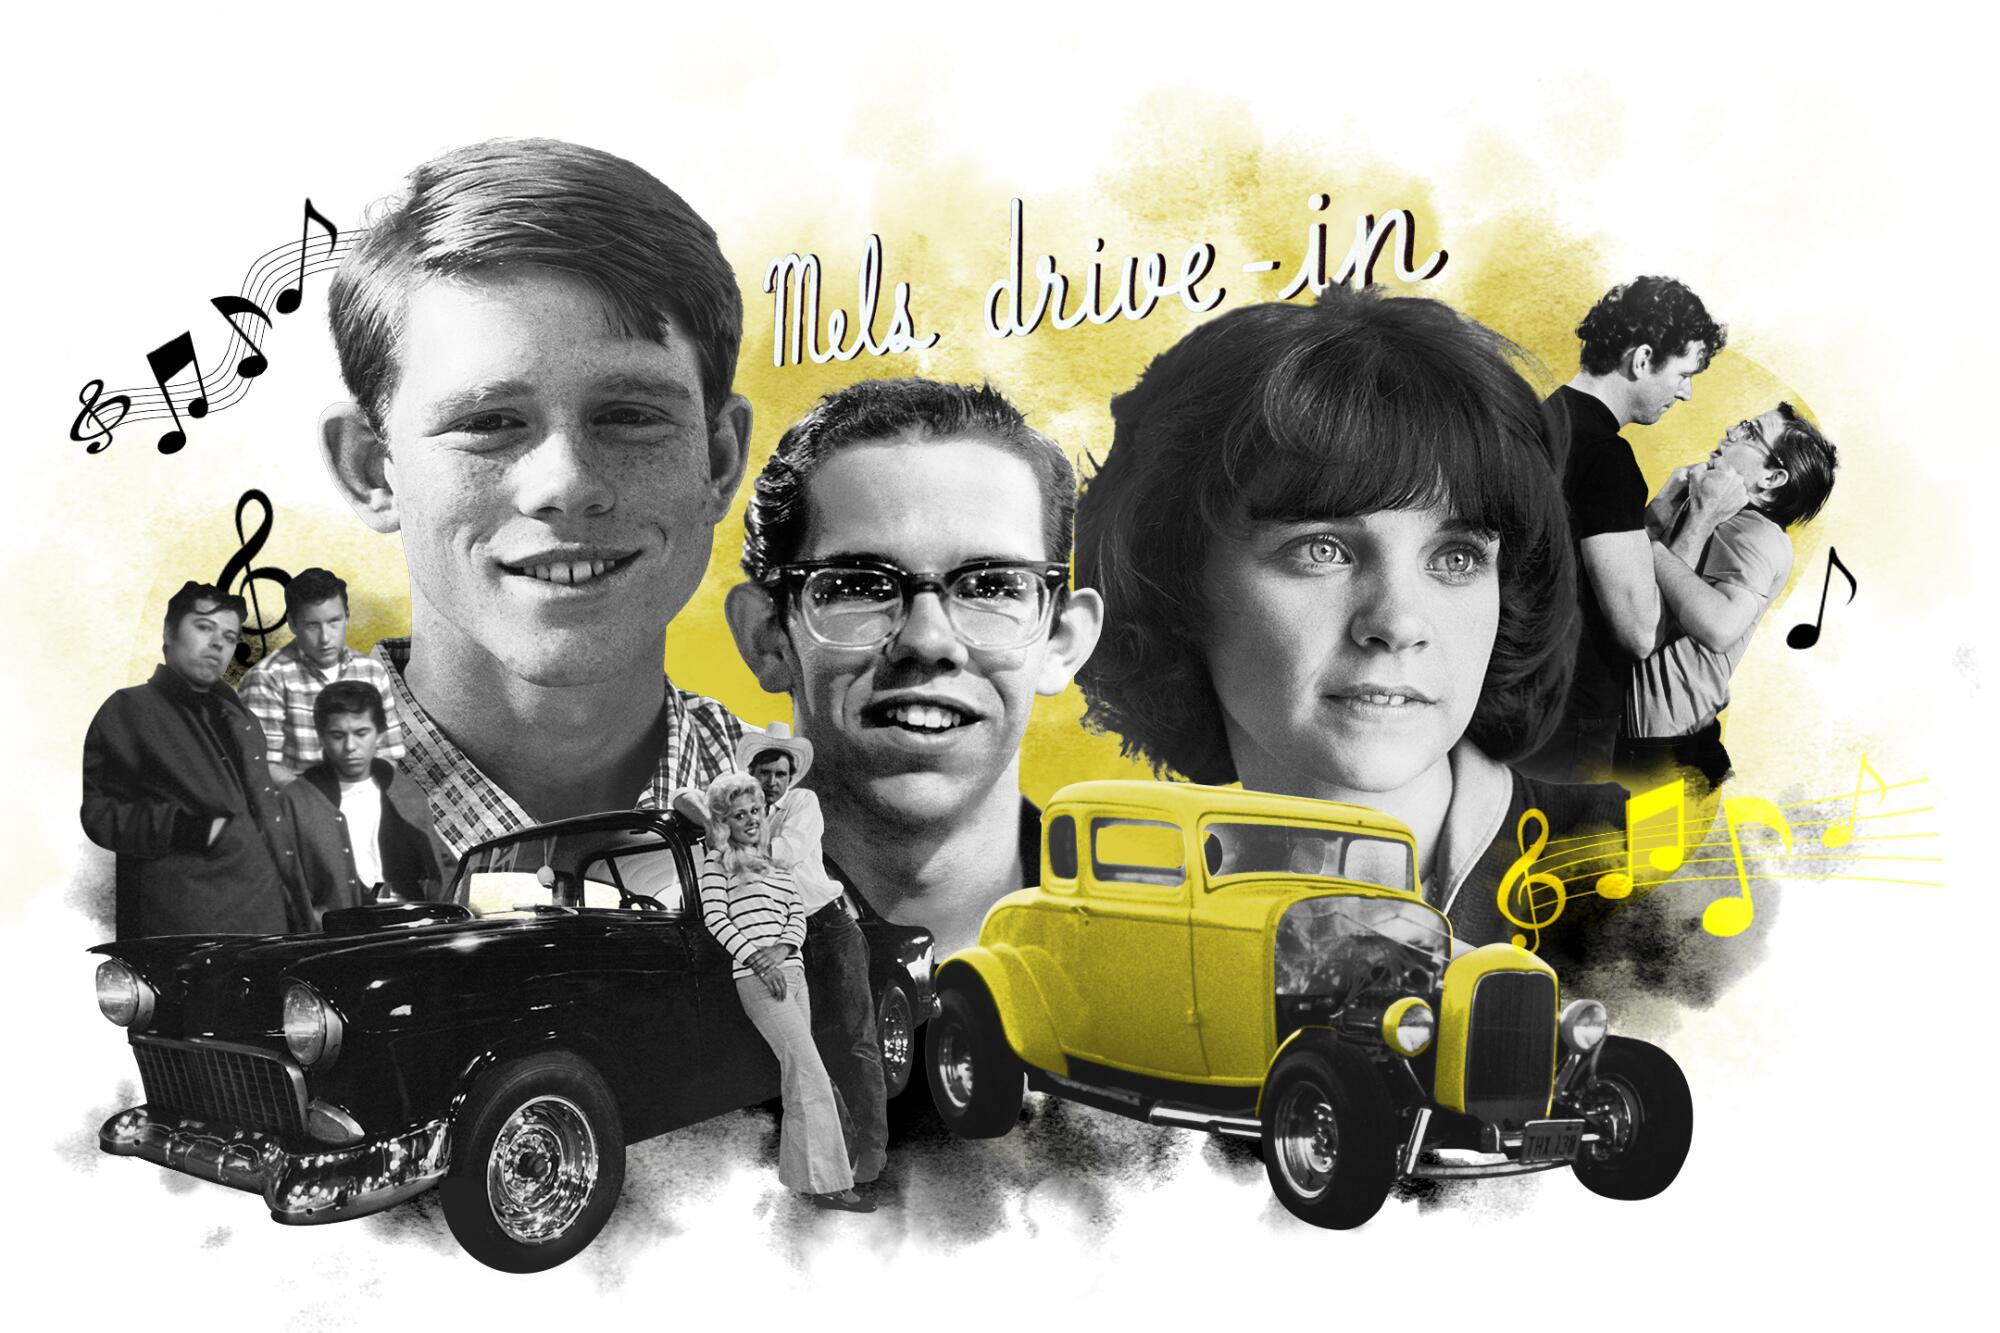 A collage of stills from the movie "American Graffiti"